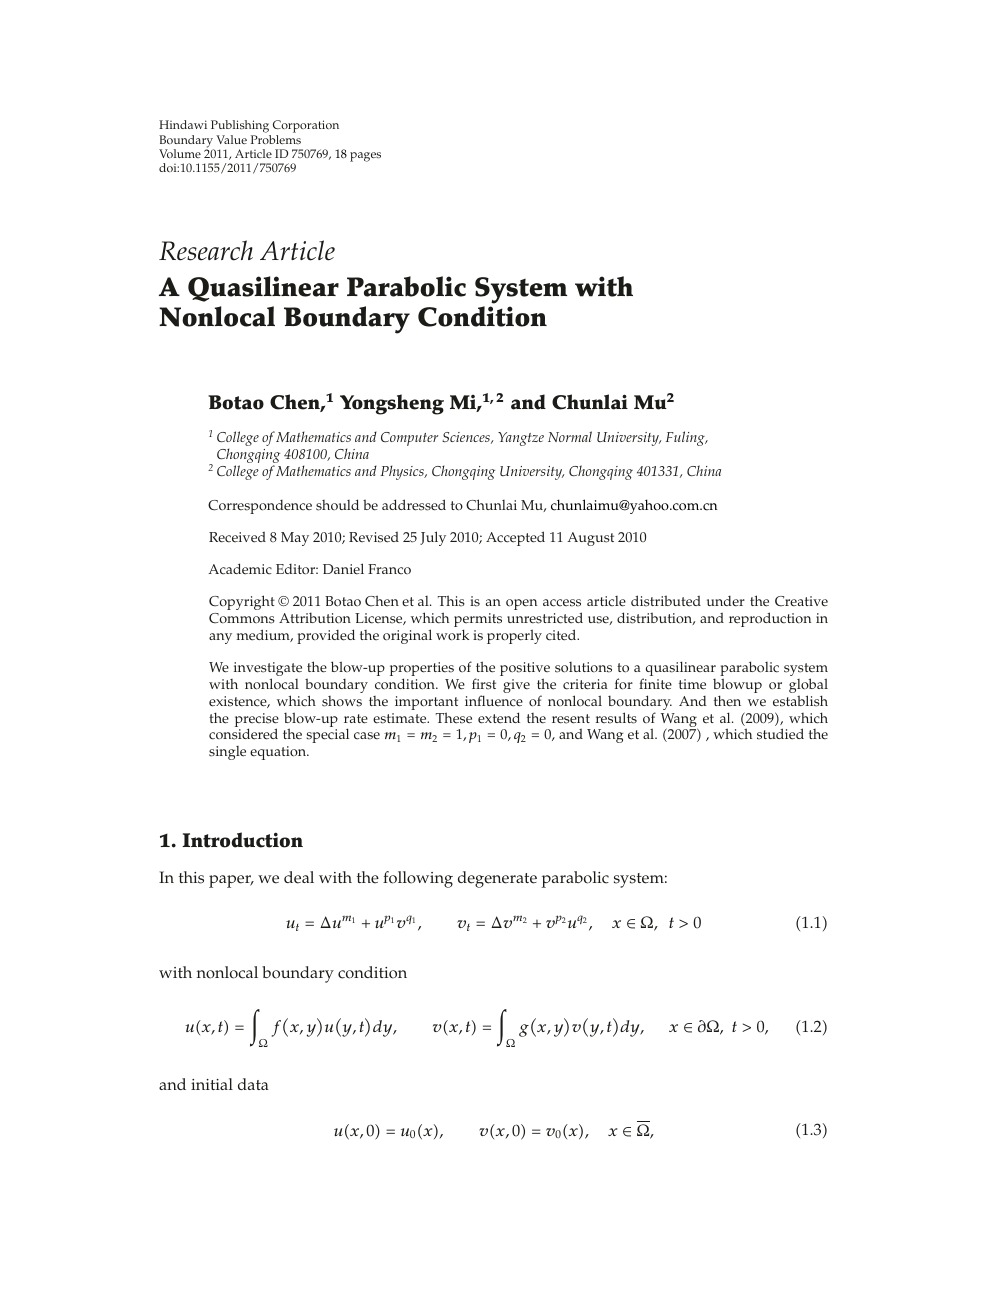 A Quasilinear Parabolic System With Nonlocal Boundary Condition Topic Of Research Paper In Mathematics Download Scholarly Article Pdf And Read For Free On Cyberleninka Open Science Hub